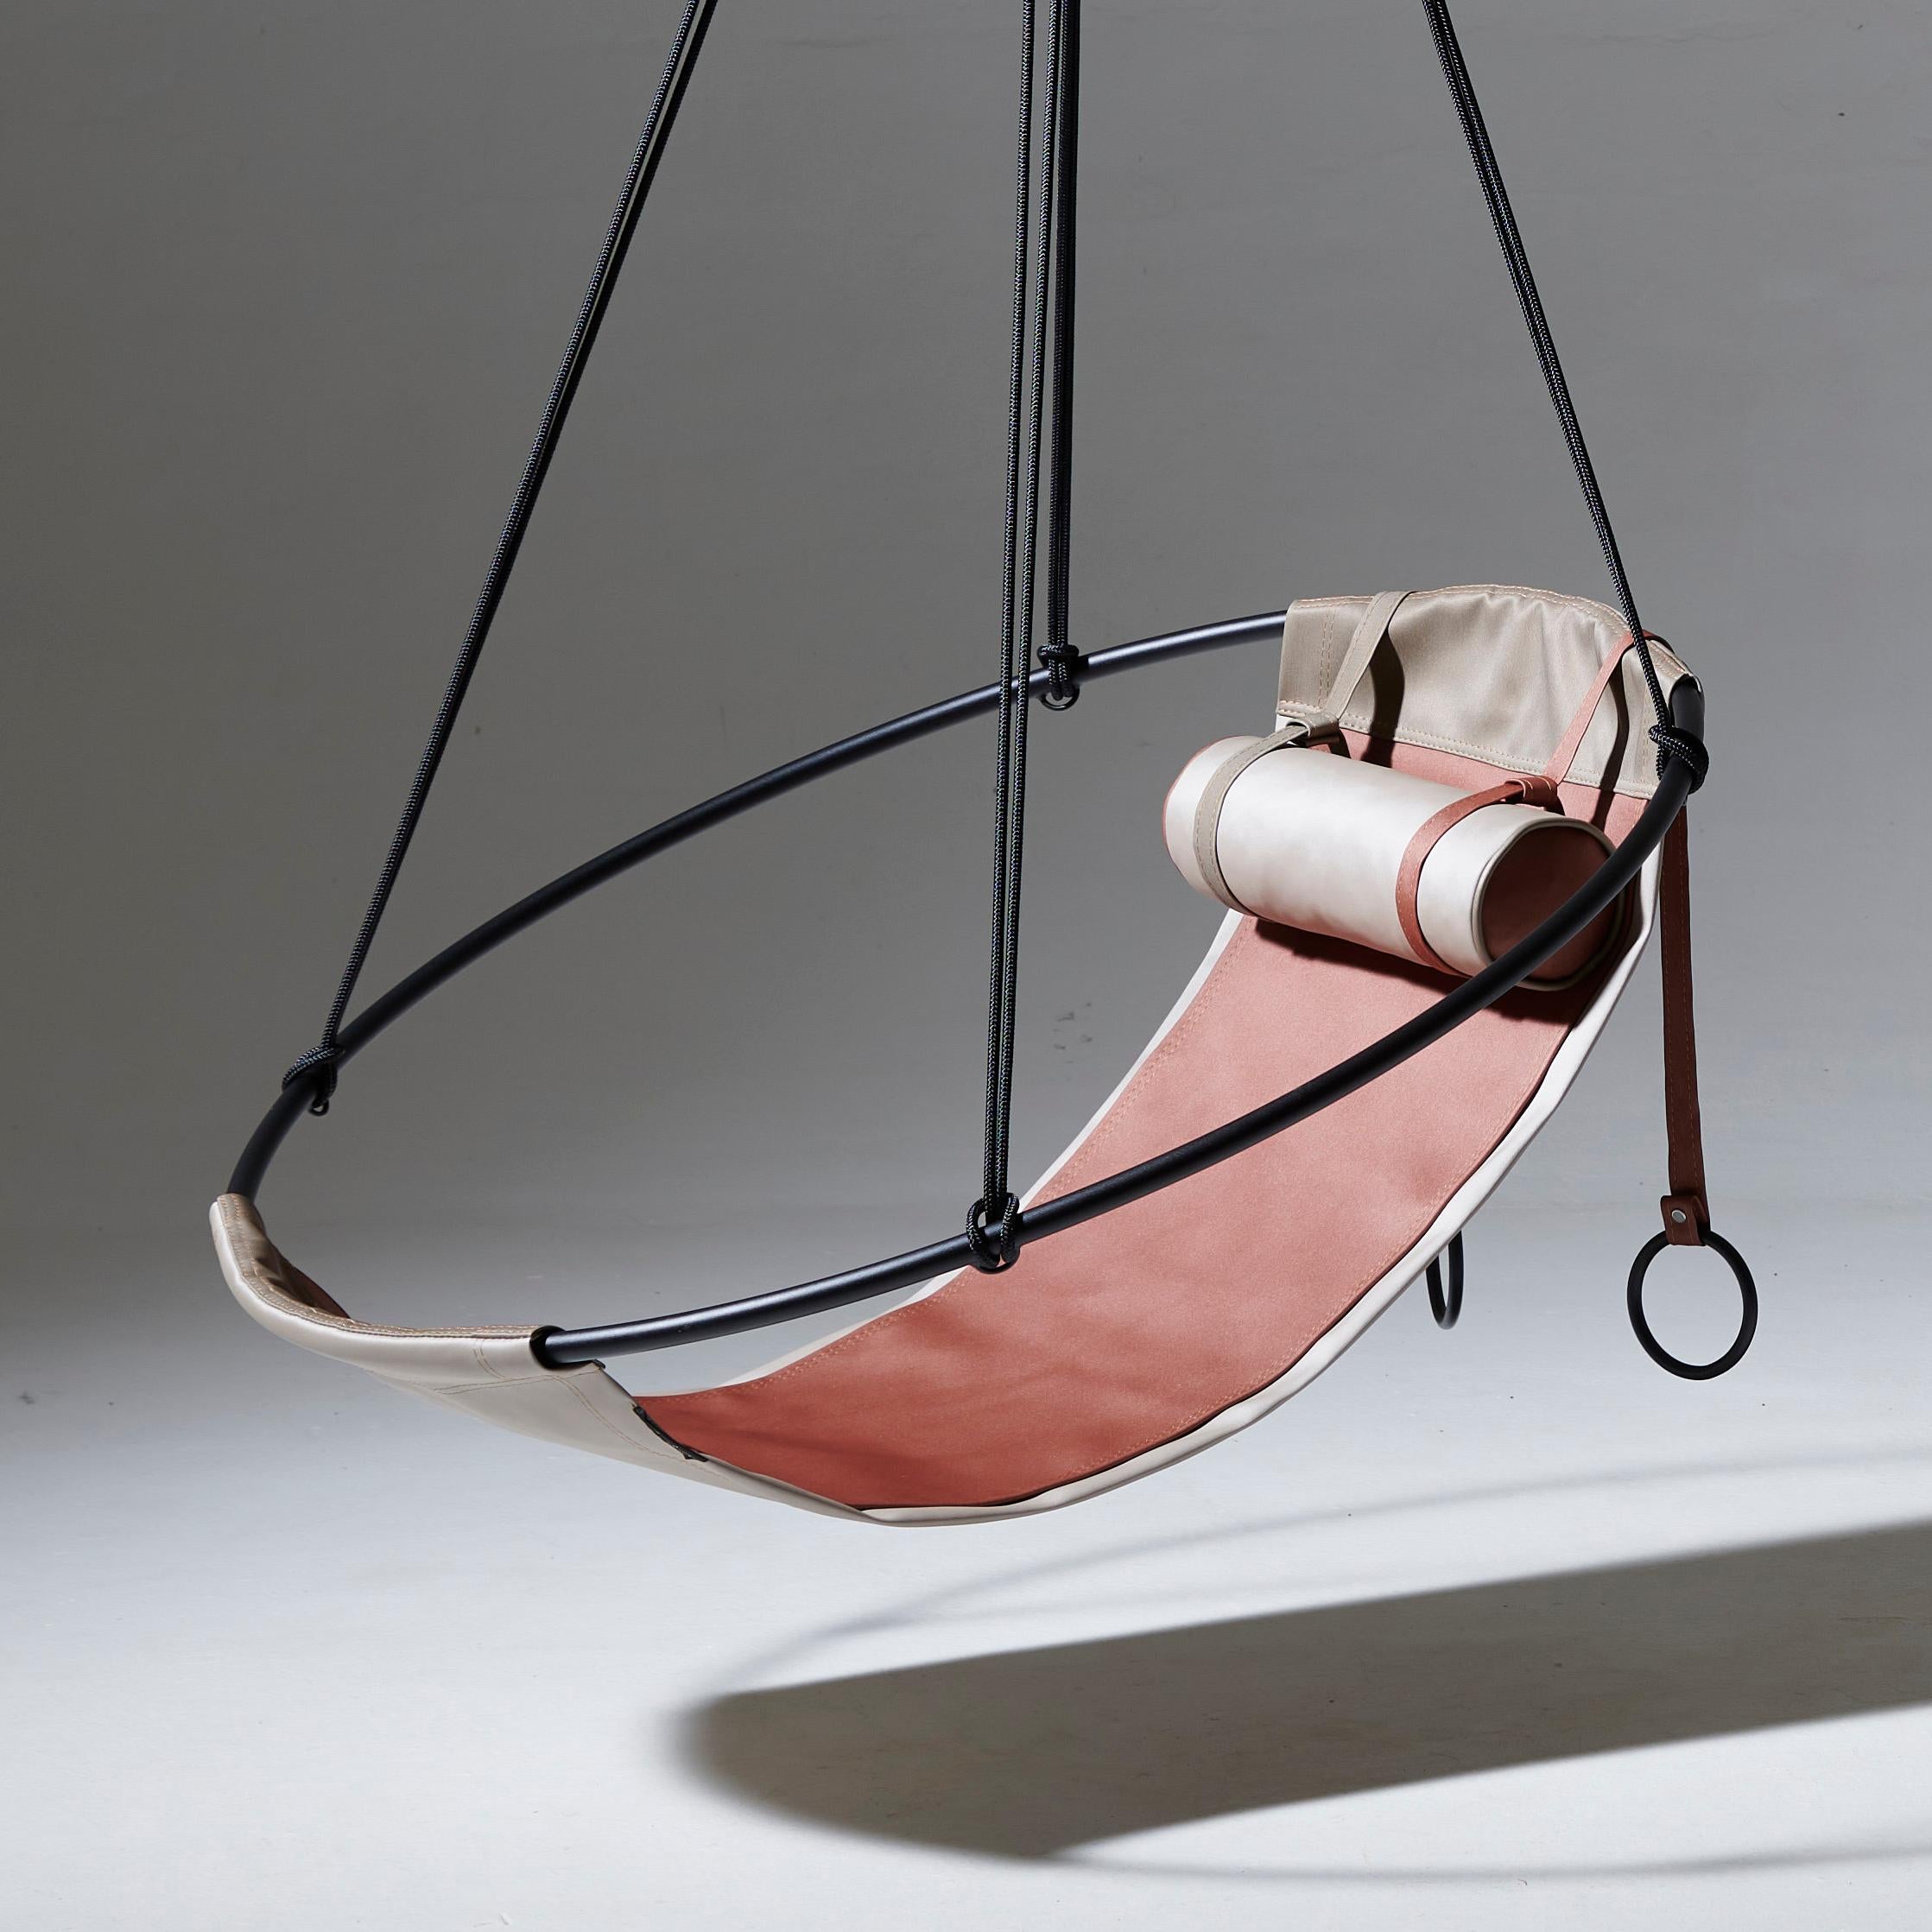 Minimalist Outdoor Hanging Chair in Sandy Earth tomes For Sale